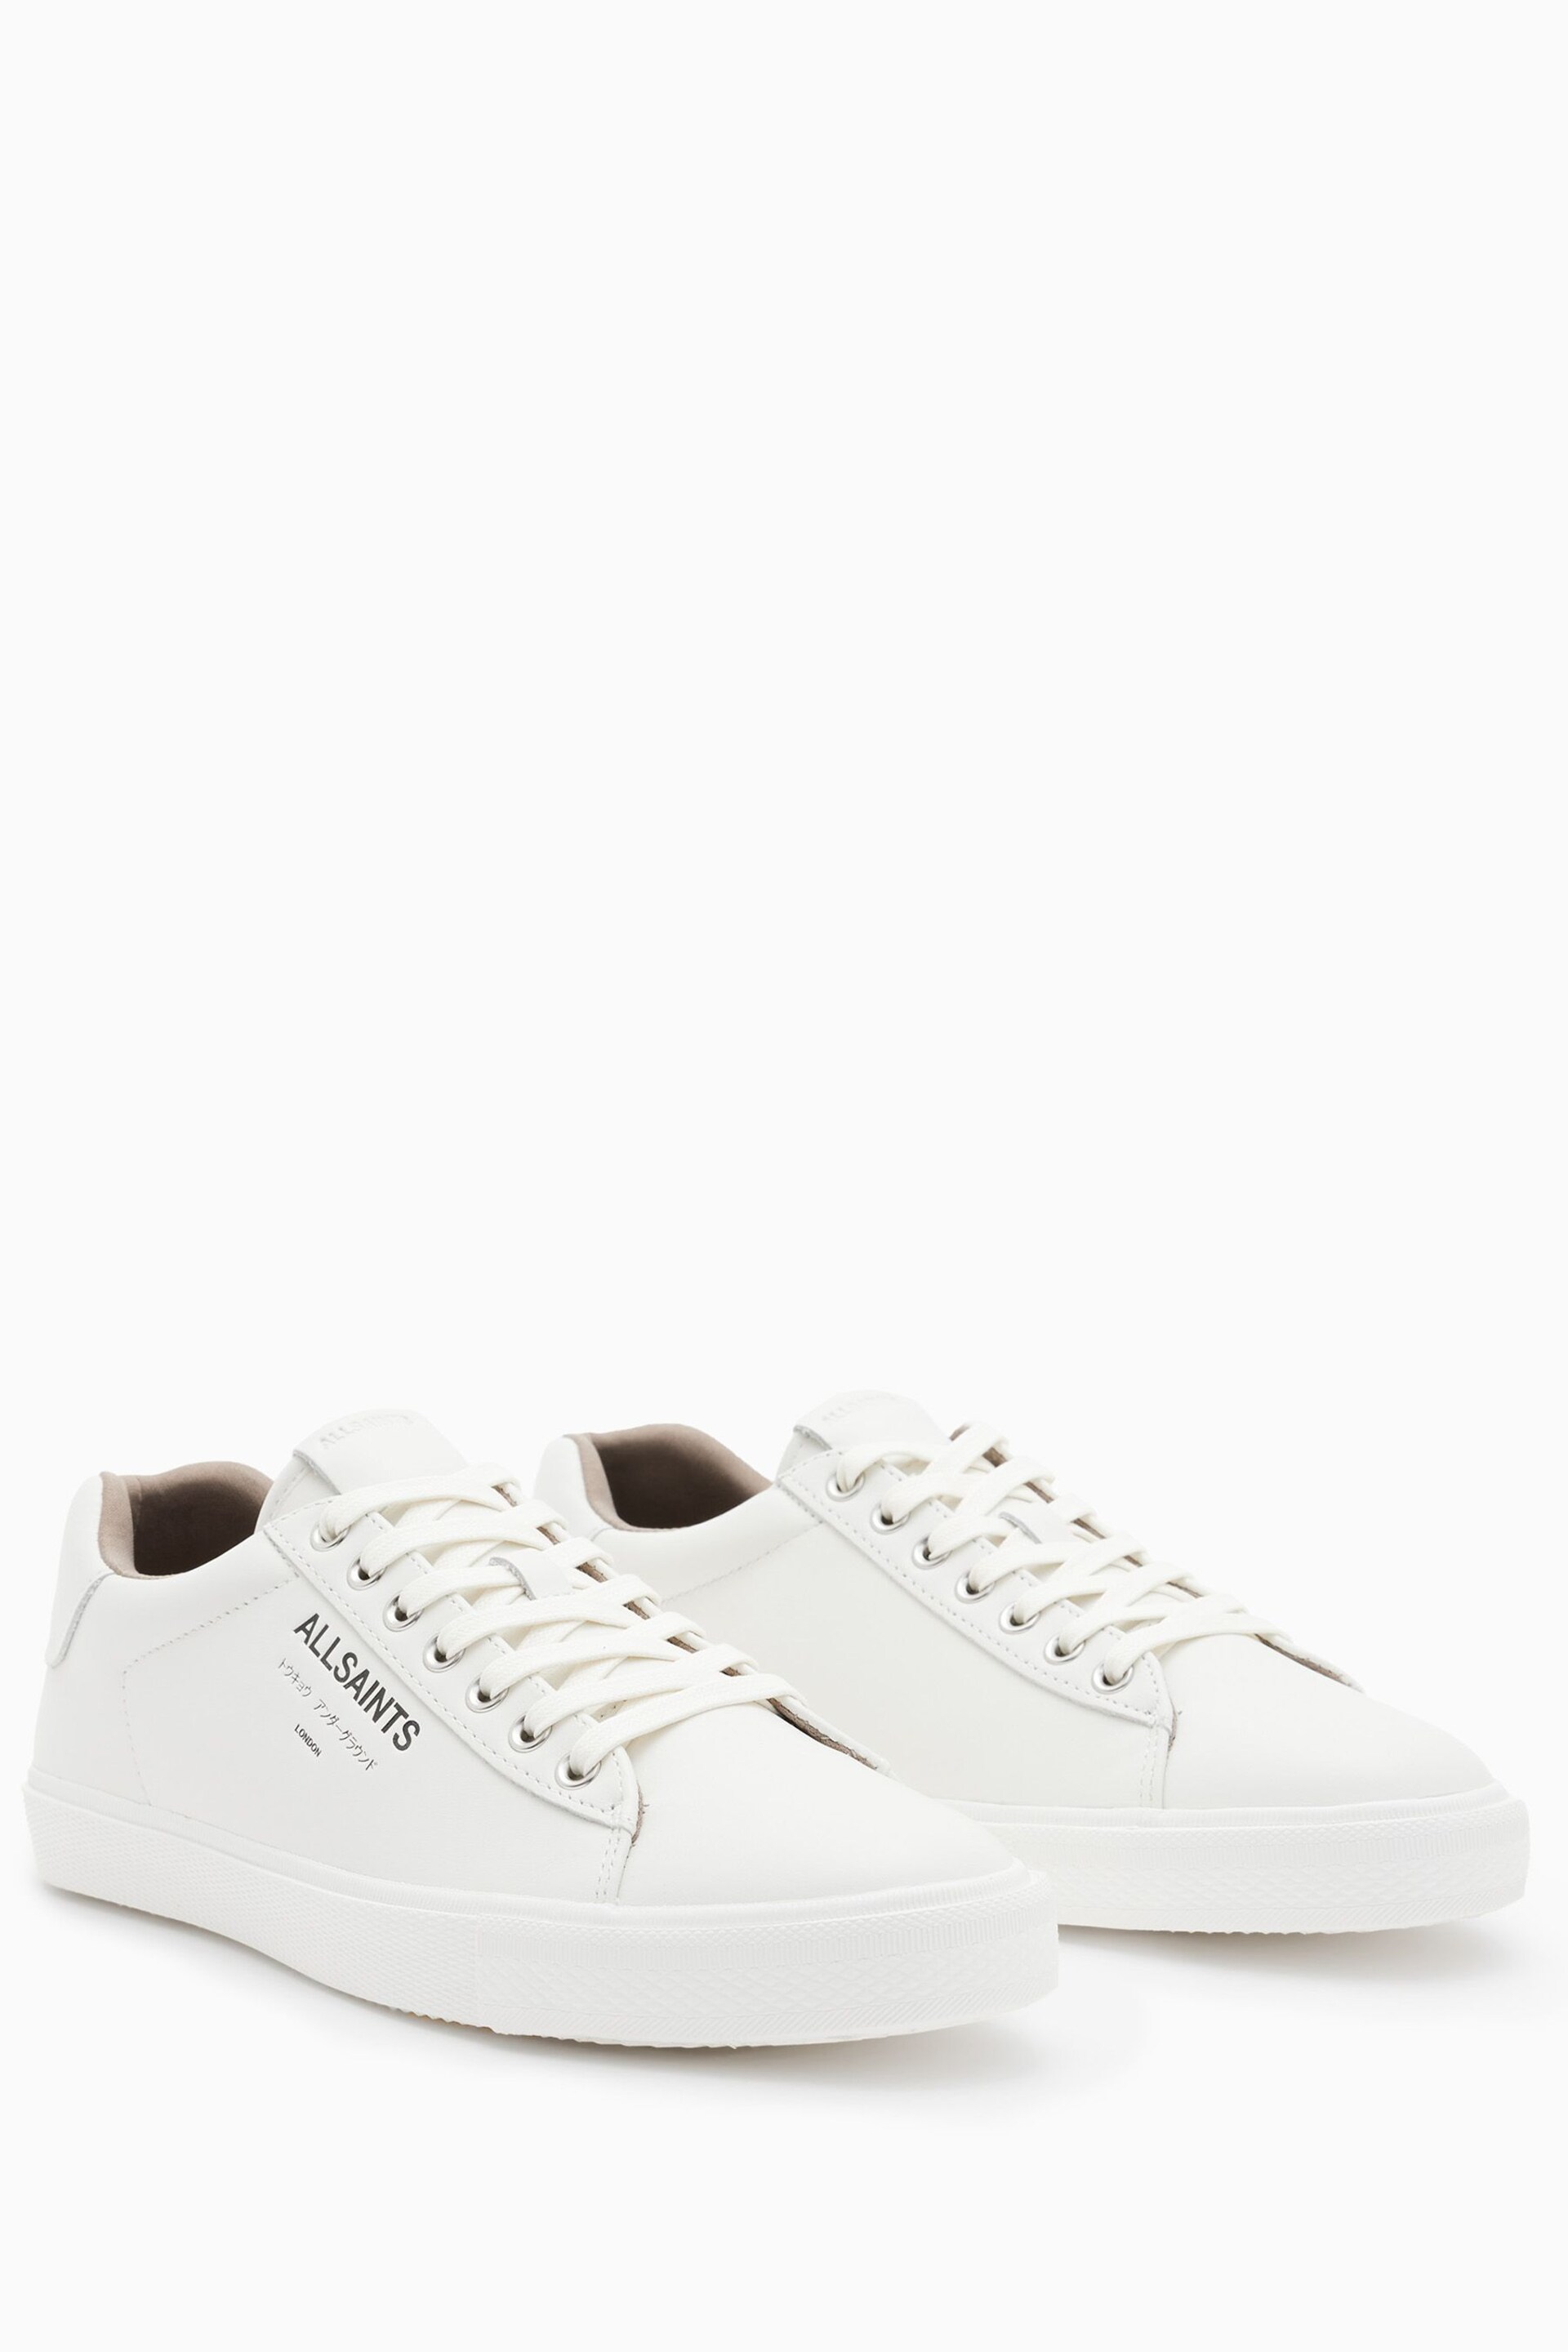 AllSaints White Underground Leather Low Top Trainers - Image 2 of 7